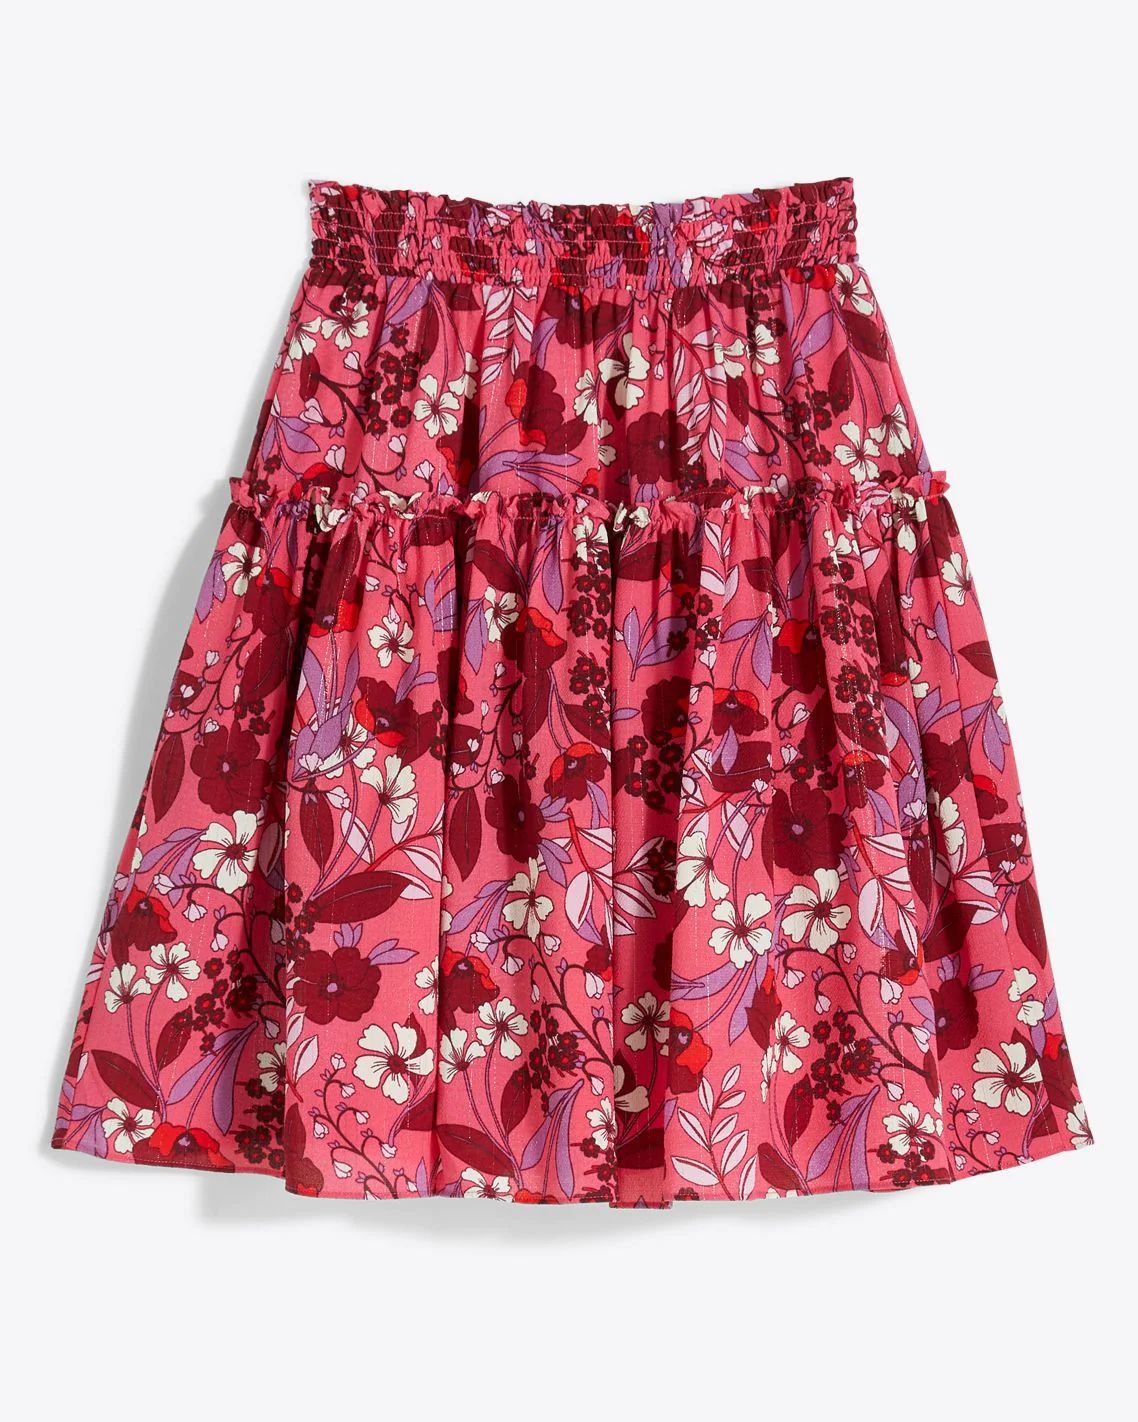 Pull on Skirt in Raspberry Clematis Floral | Draper James (US)